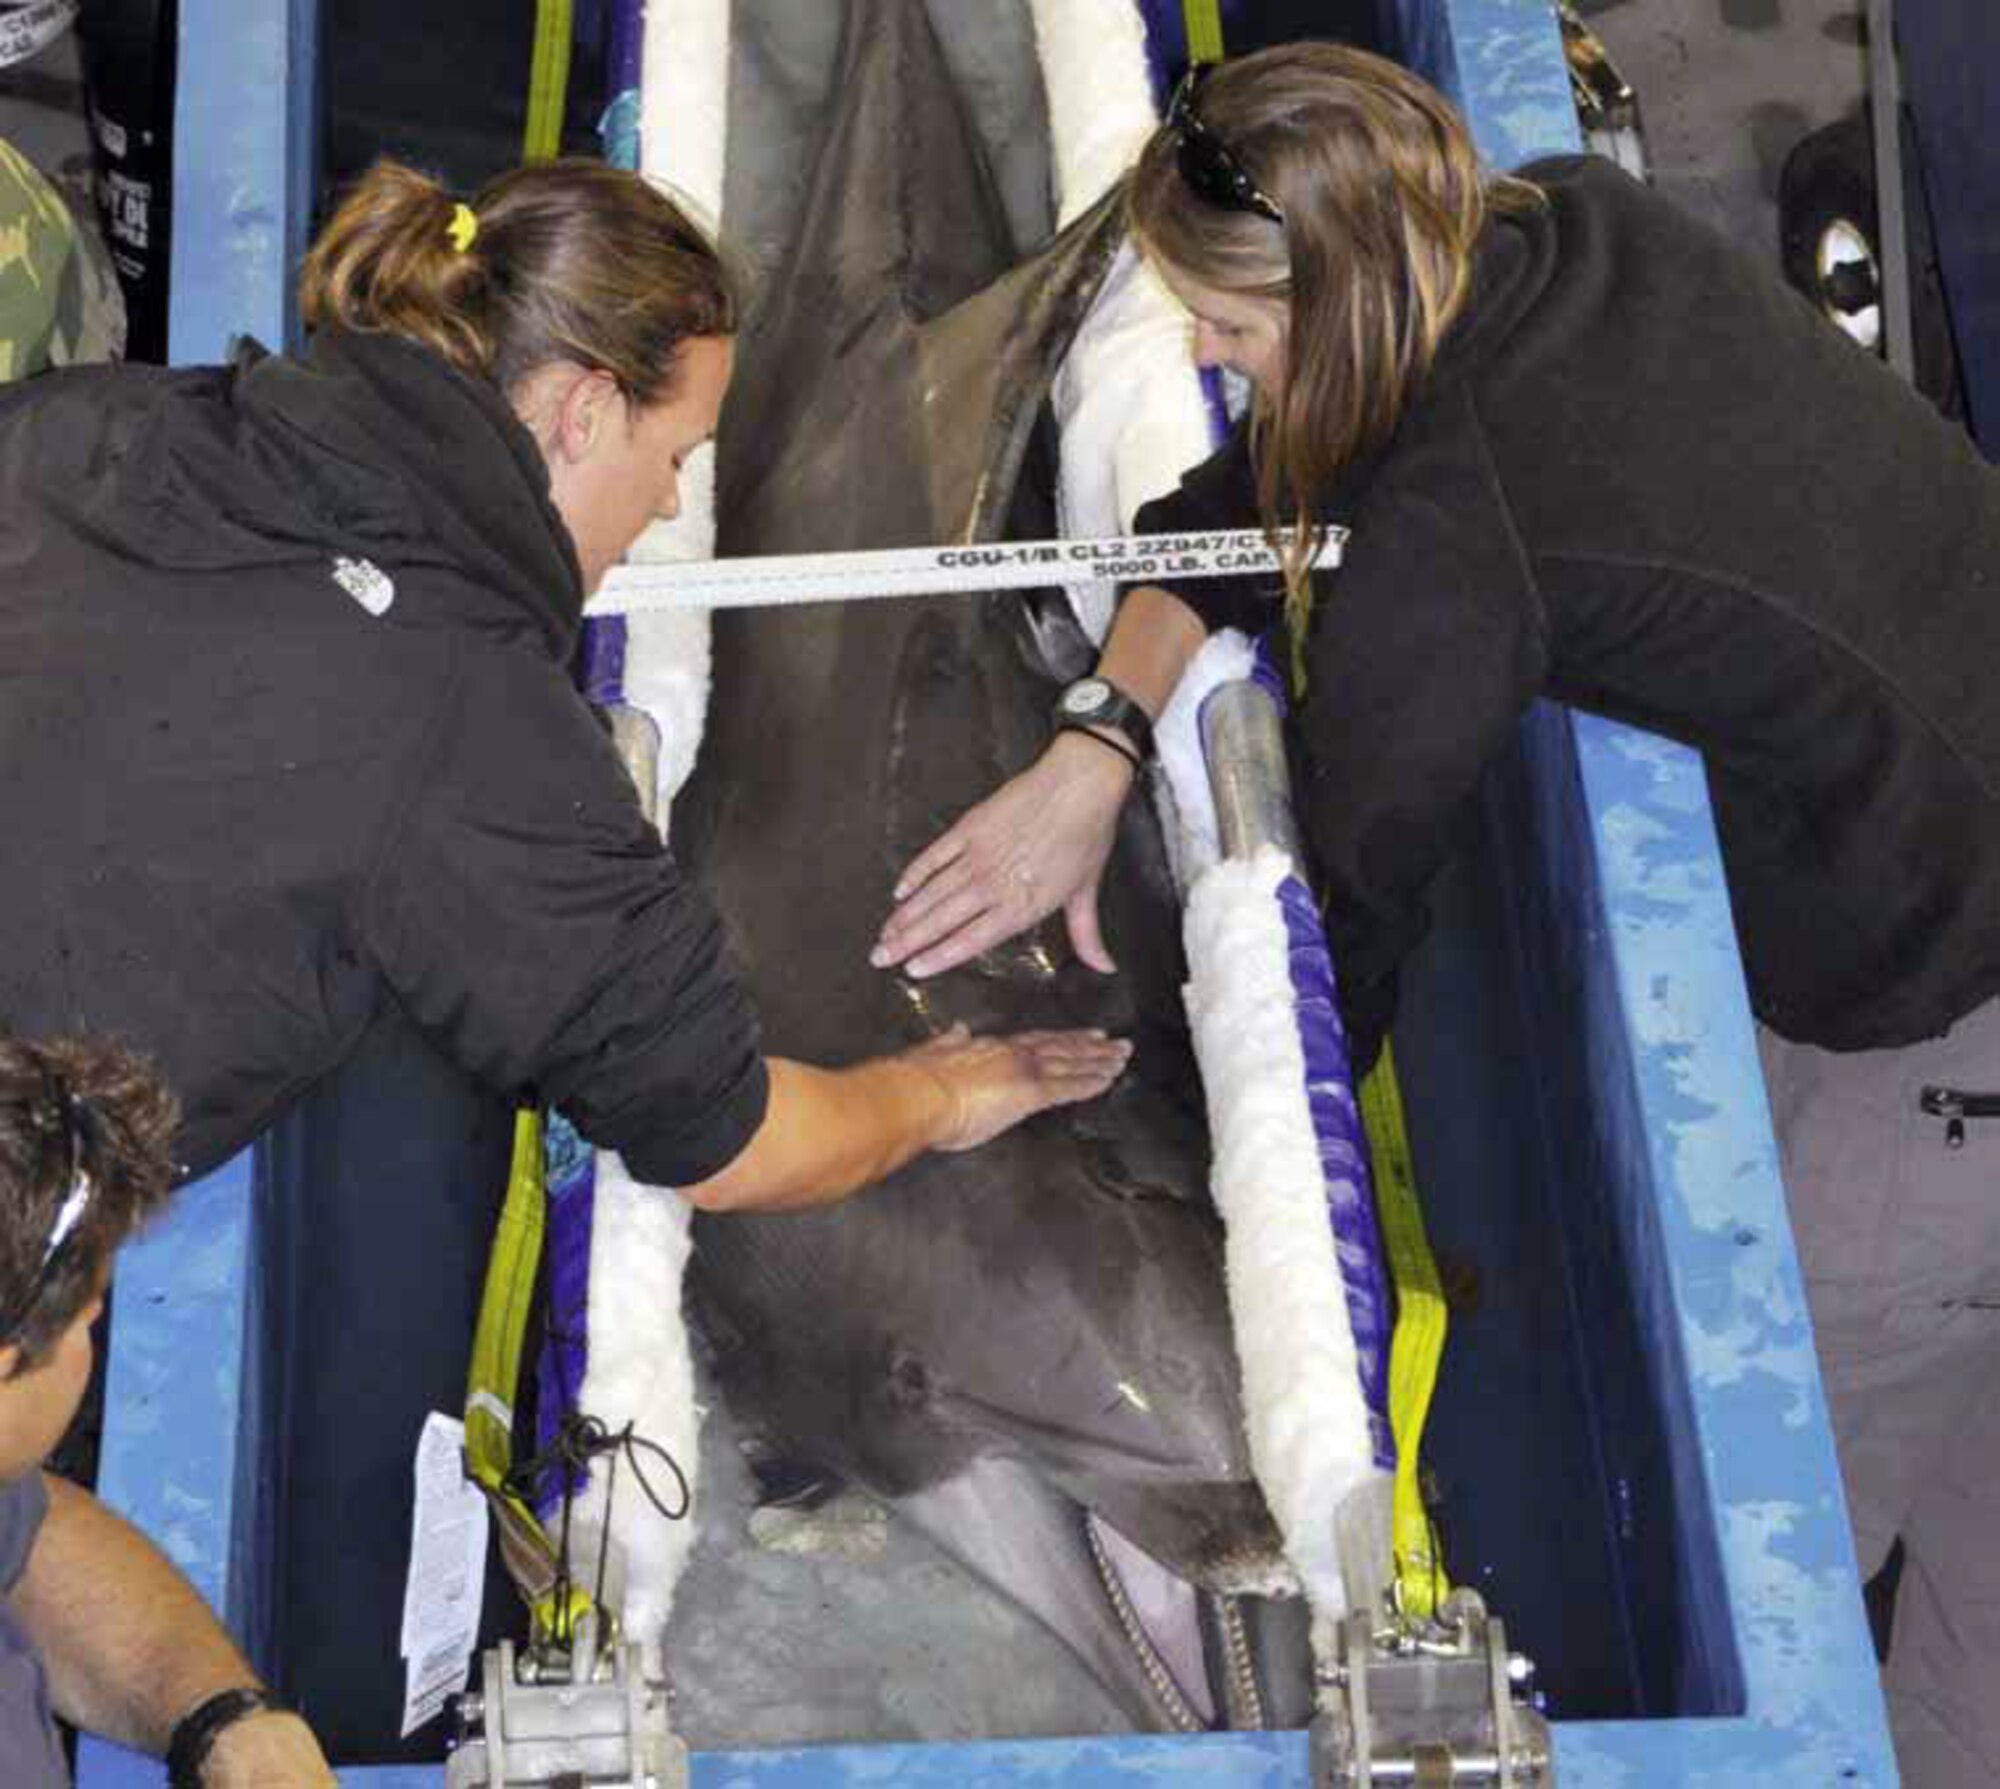 Jennifer Cacioppo (left), a mammal handler from Science Application International Corporation and Jennifer Meegan, a veterinarian from the National Marine Mammal Foundation pet a bottlenose dolphin from Naval Air Station North Island, Coronado, Calif., March 26, onboard a March Field C-17. Unlike human divers, dolphins are capable of making repeated deep dives without experiencing “the bends,” or decompression sickness. (U.S. Air Force photo by Staff Sgt. Megan Crusher)